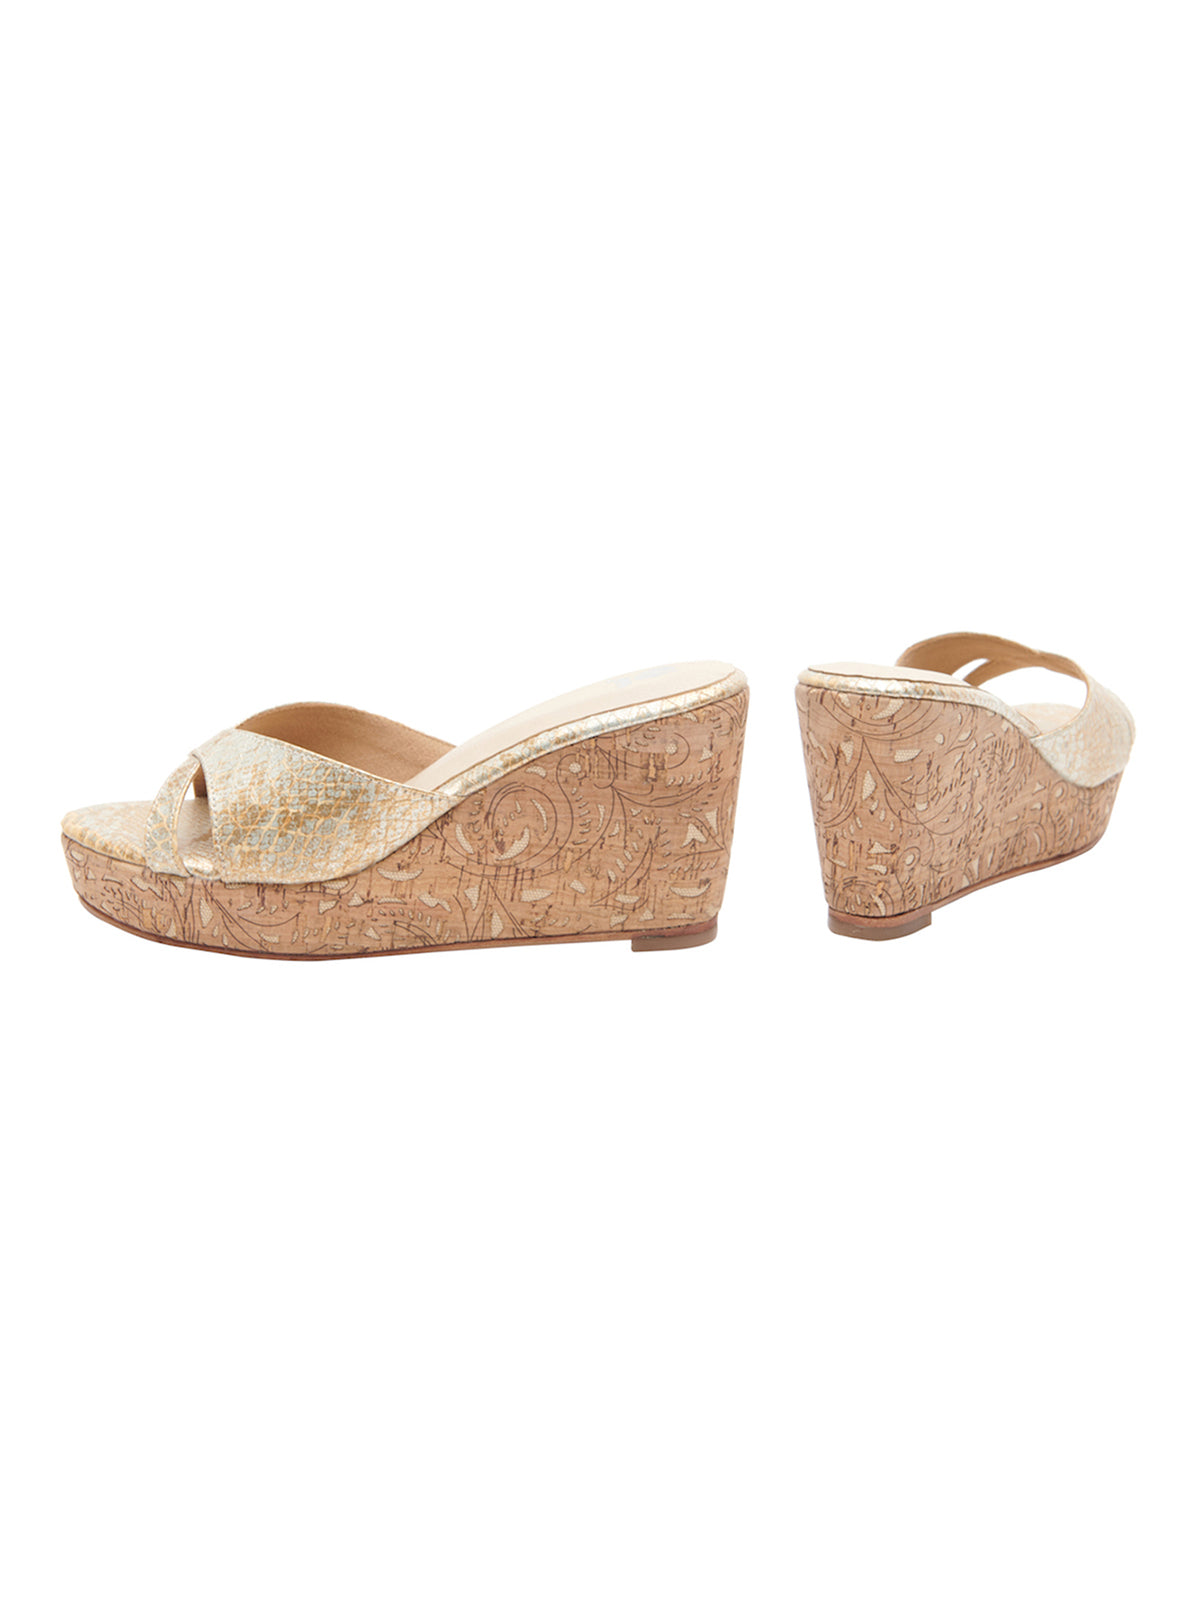 Cork And Metallic slightly textured and detailed Platforms